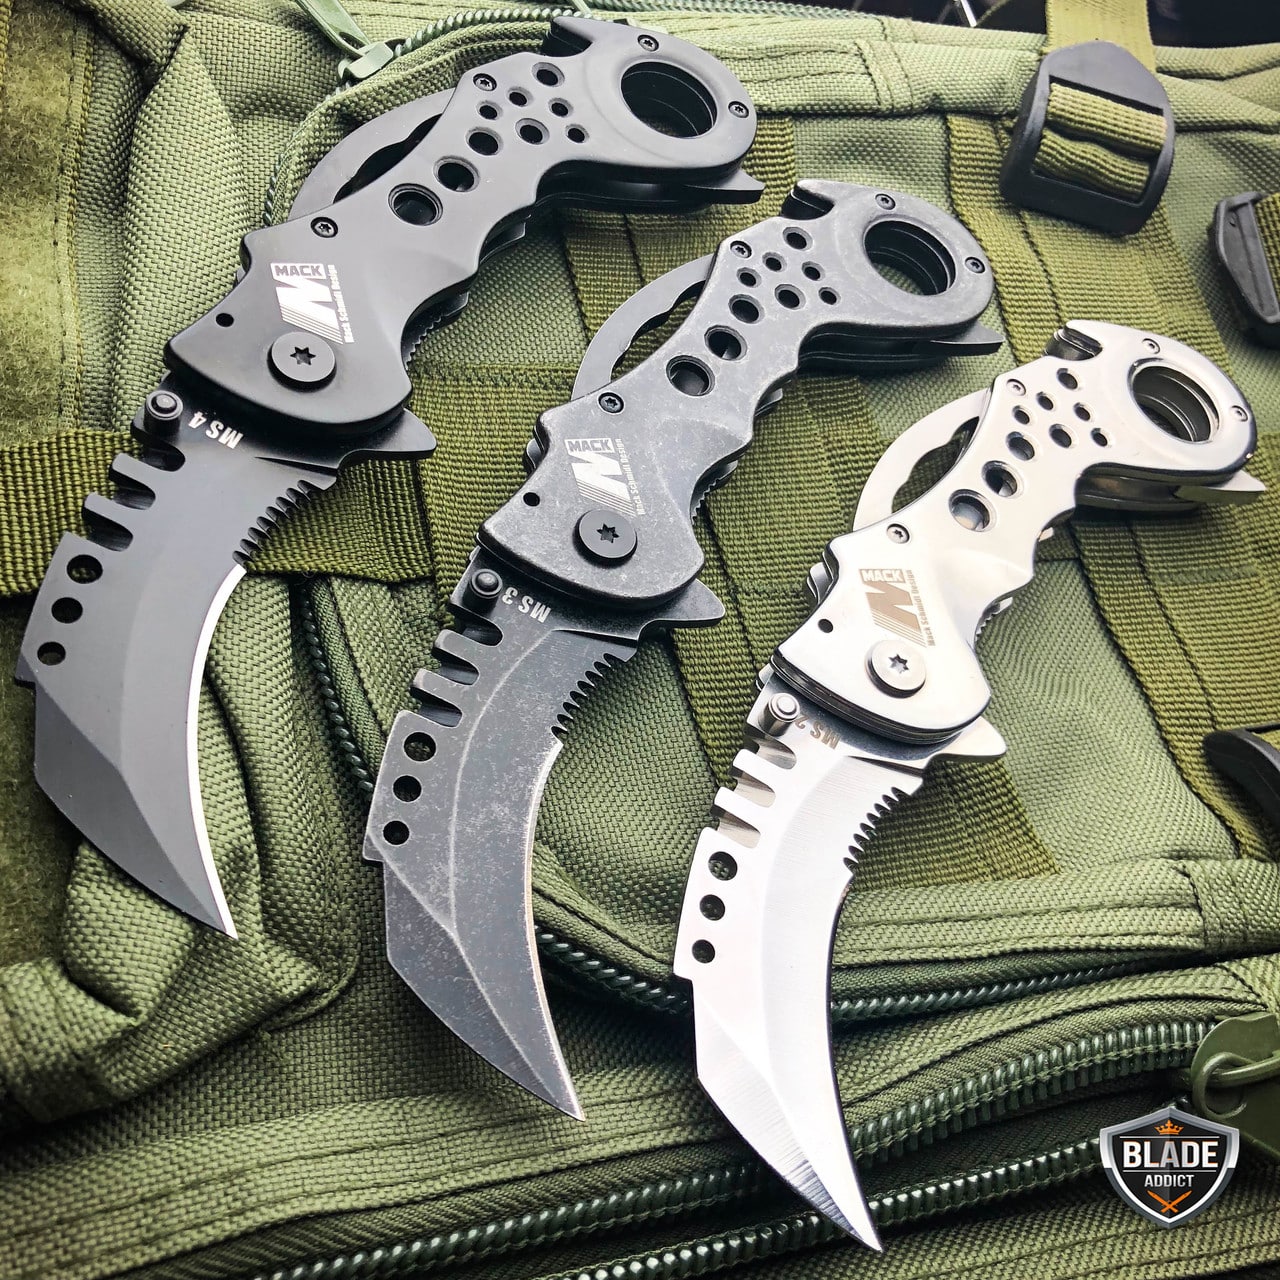 7.5" Heavy Duty Tactical Karambit Claw Spring Assisted Pocket Knife